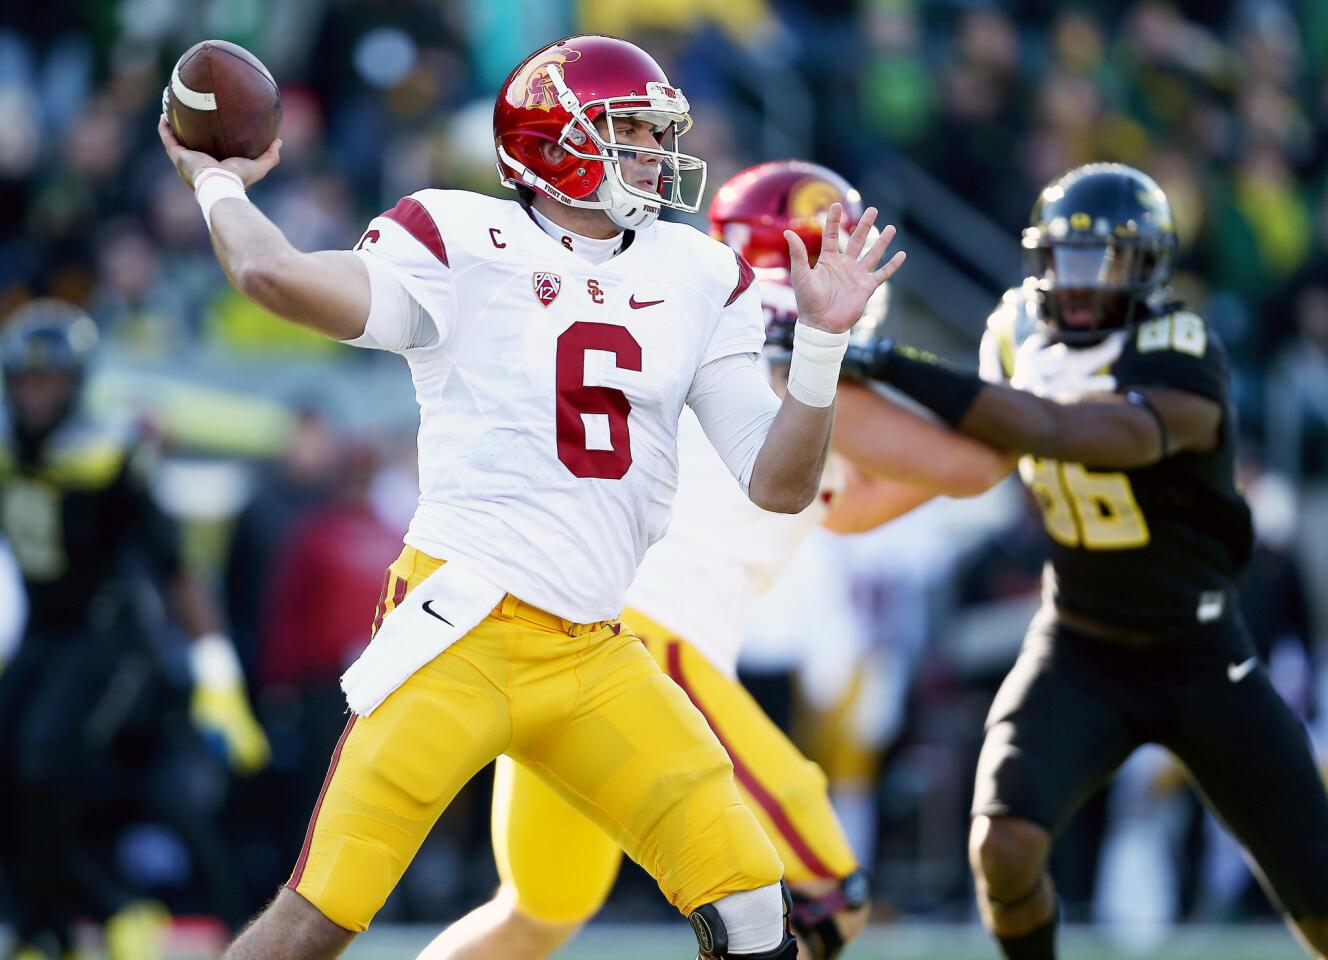 USC's Cody Kessler wants to keep emotions in check for final game at Coliseum